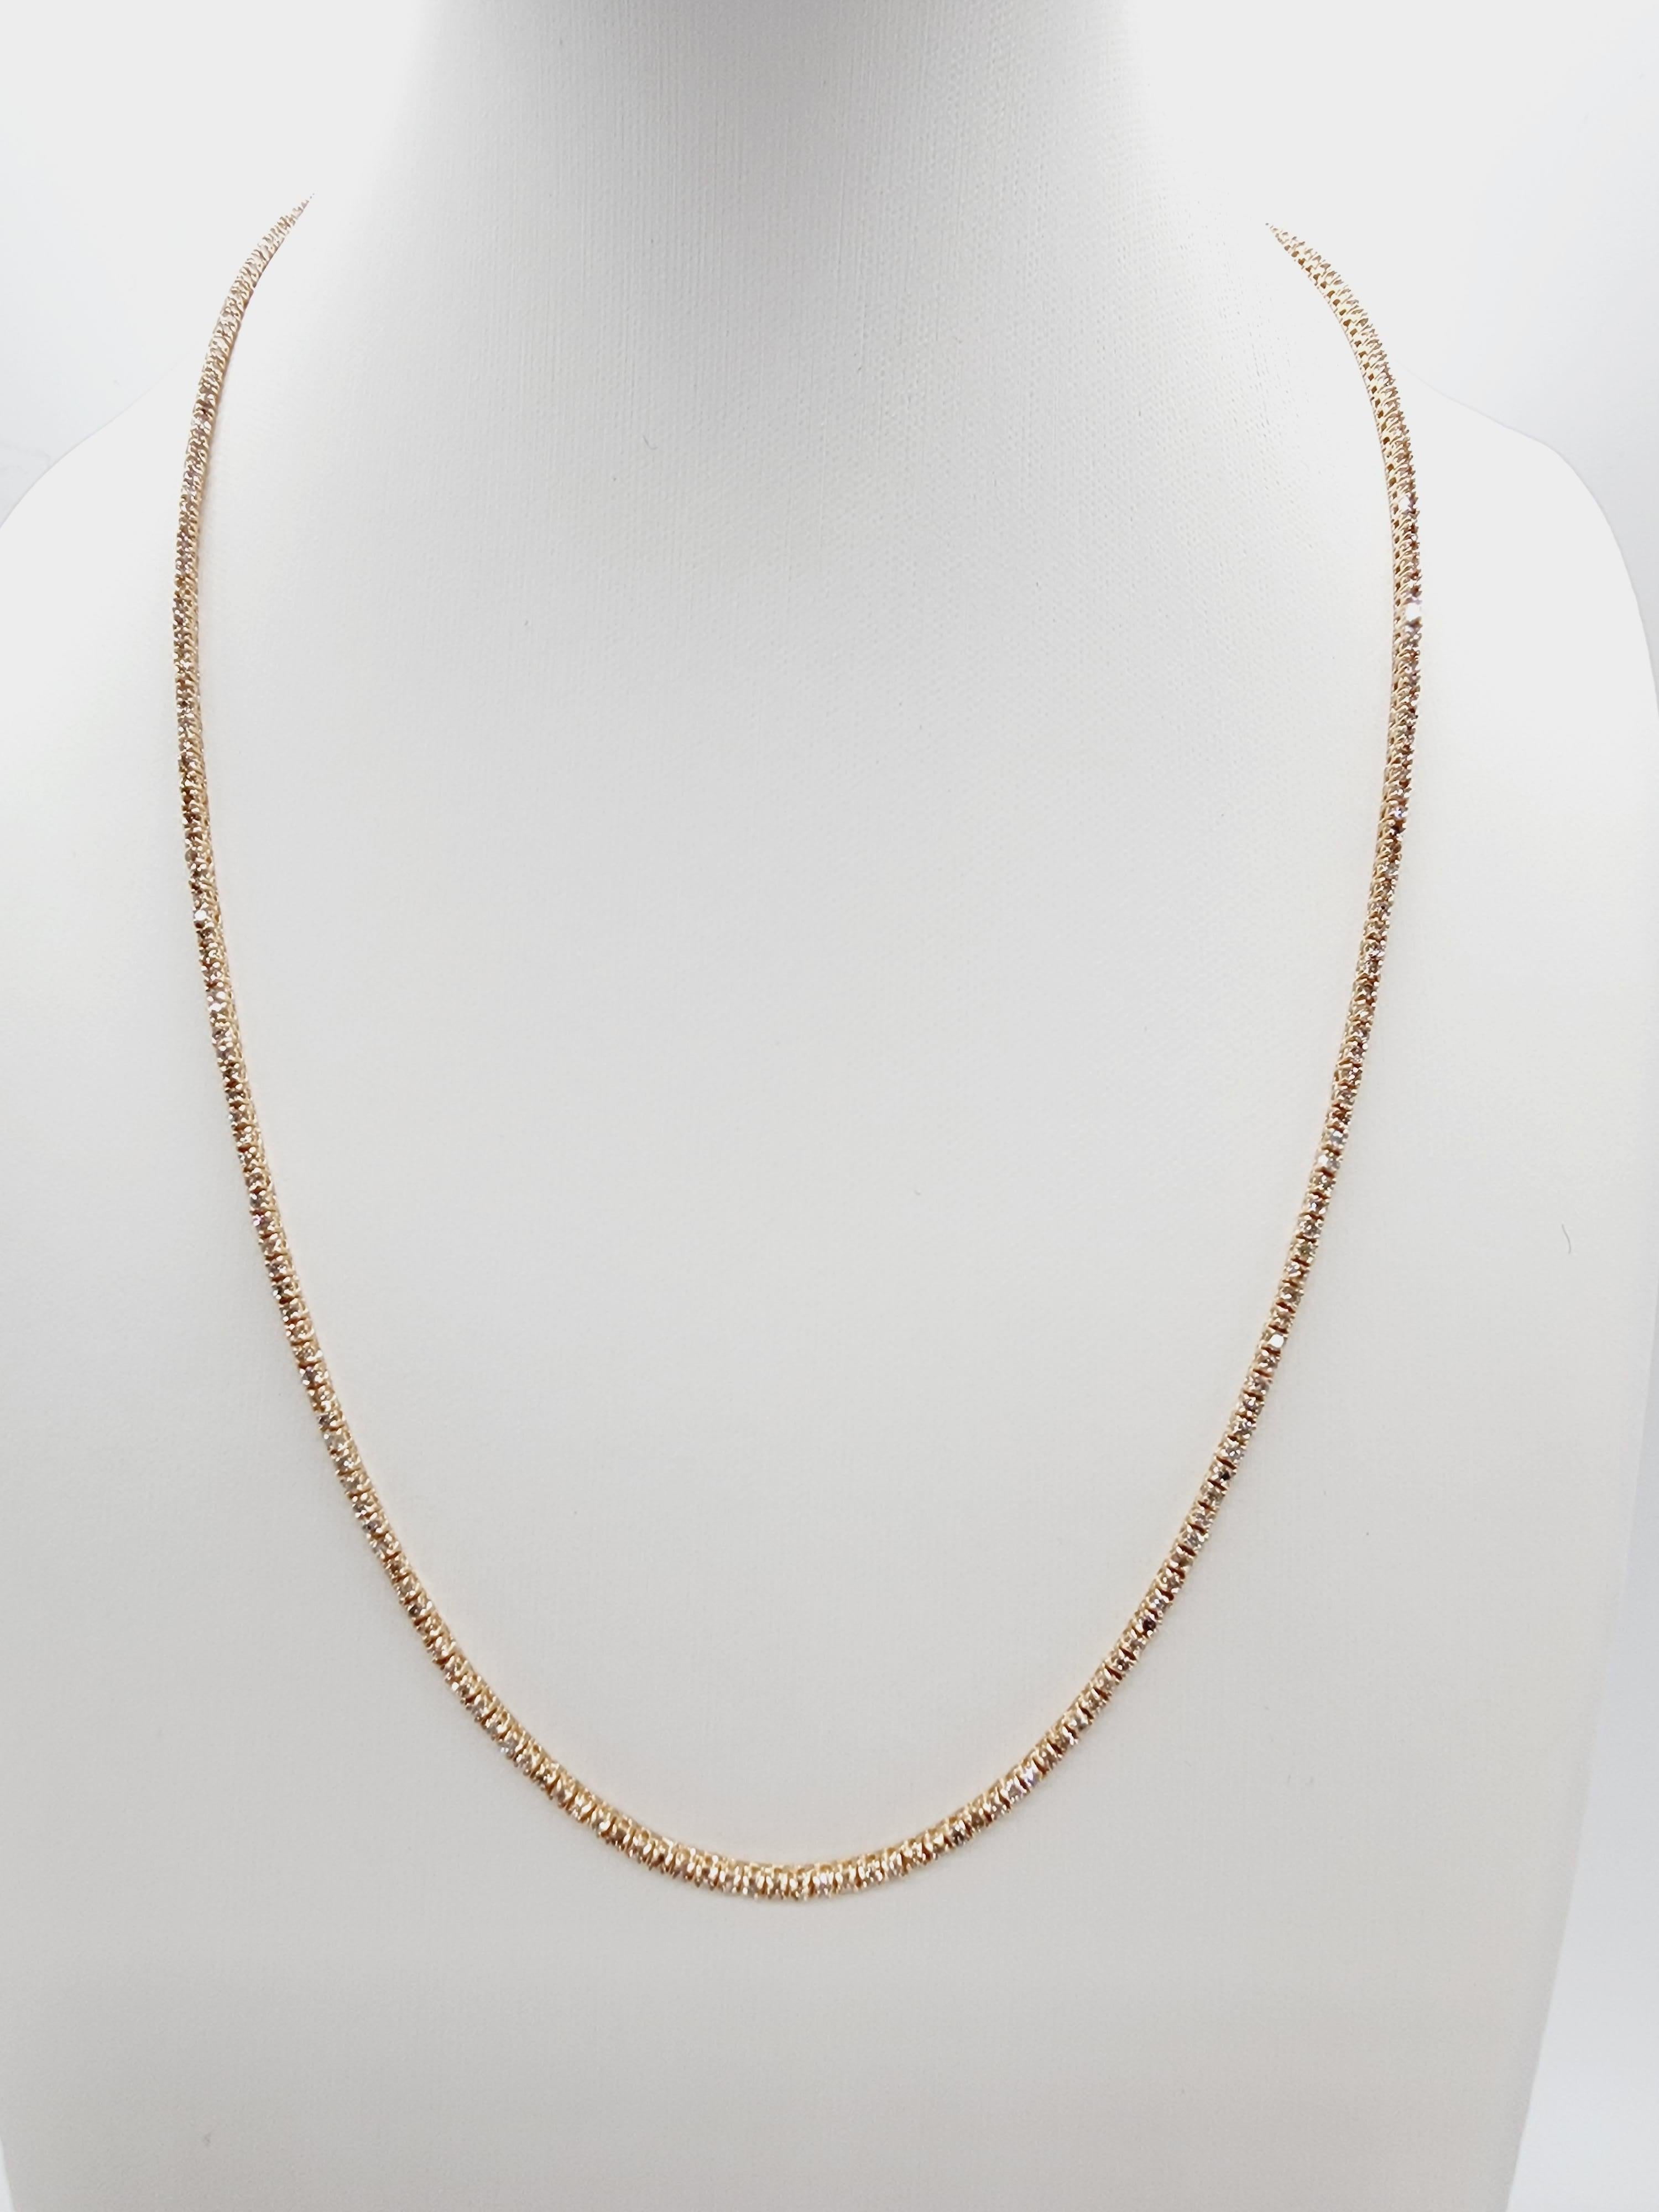 Brilliant and beautiful tennis necklace, natural round-brilliant cut white diamonds clean and Excellent shine. 14k rose gold classic four-prong style for maximum light brilliance. Elegance for every occasion.

18 inch length. 
Average H Color, SI